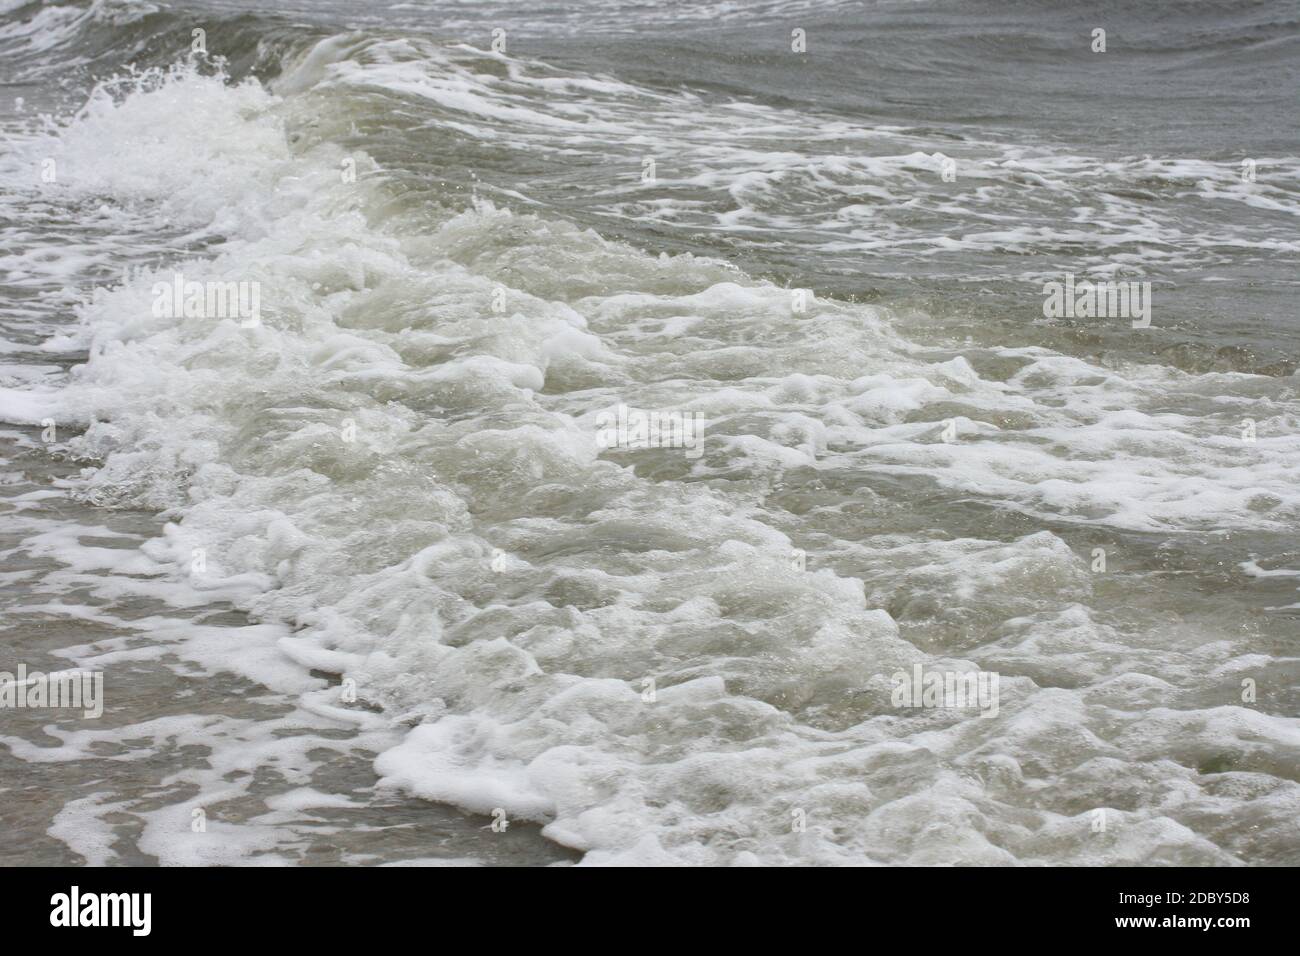 Waves with white crests inundate the sandy beach Stock Photo